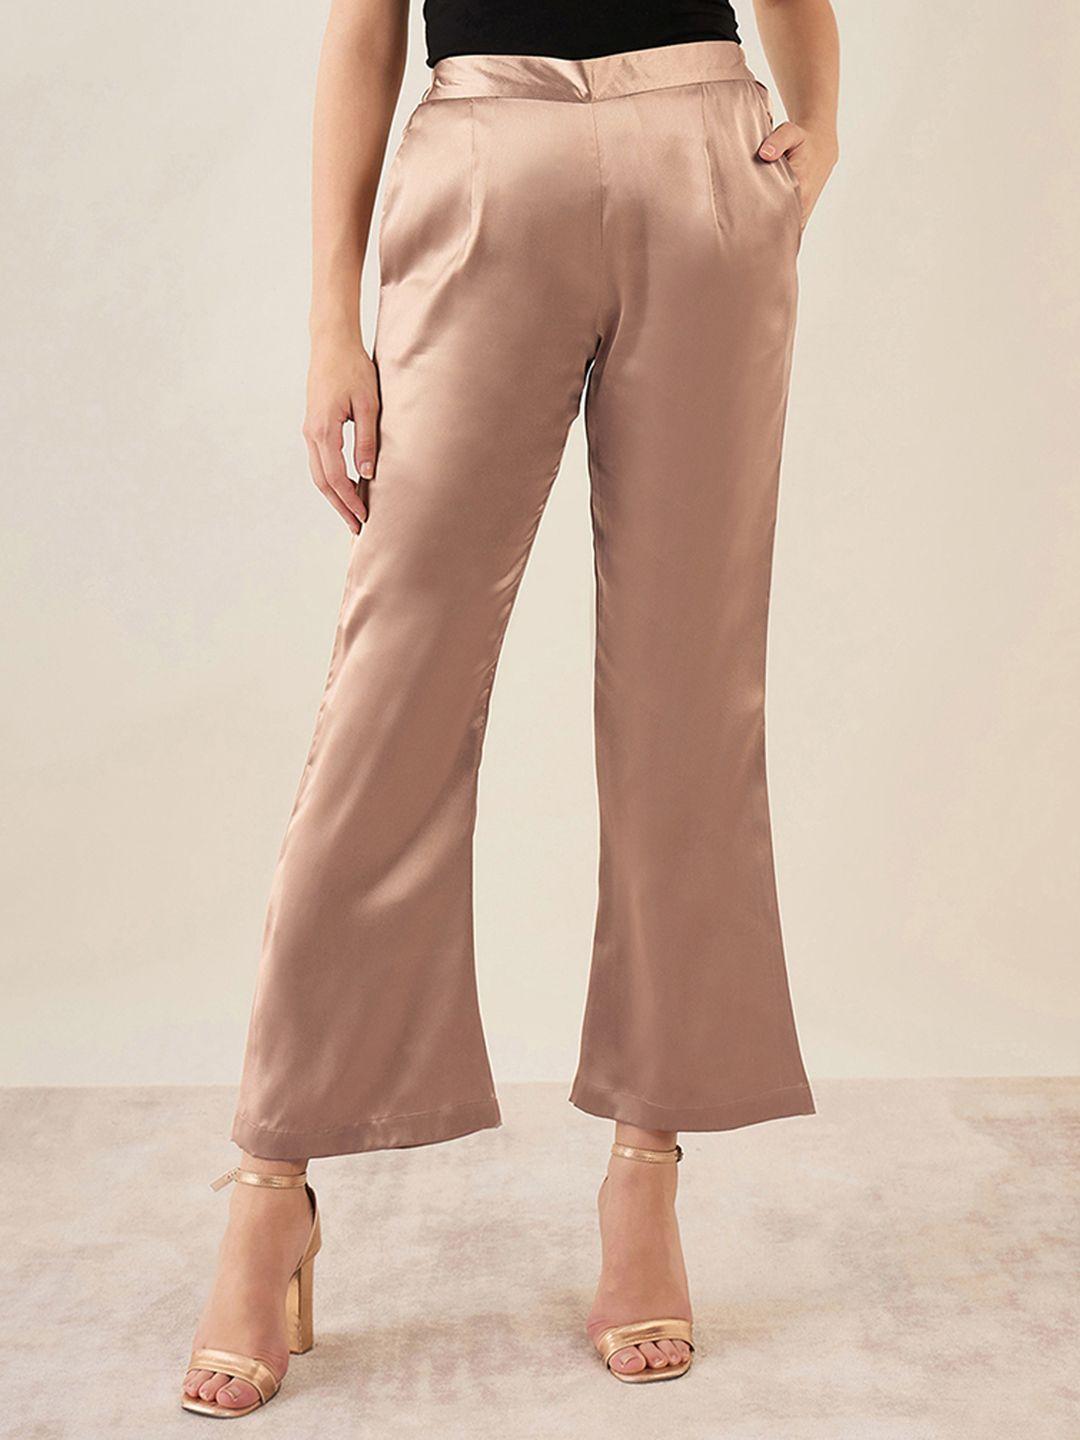 first-resort-by-ramola-bachchan-women-flared-mid-rise-satin-cropped-trouser